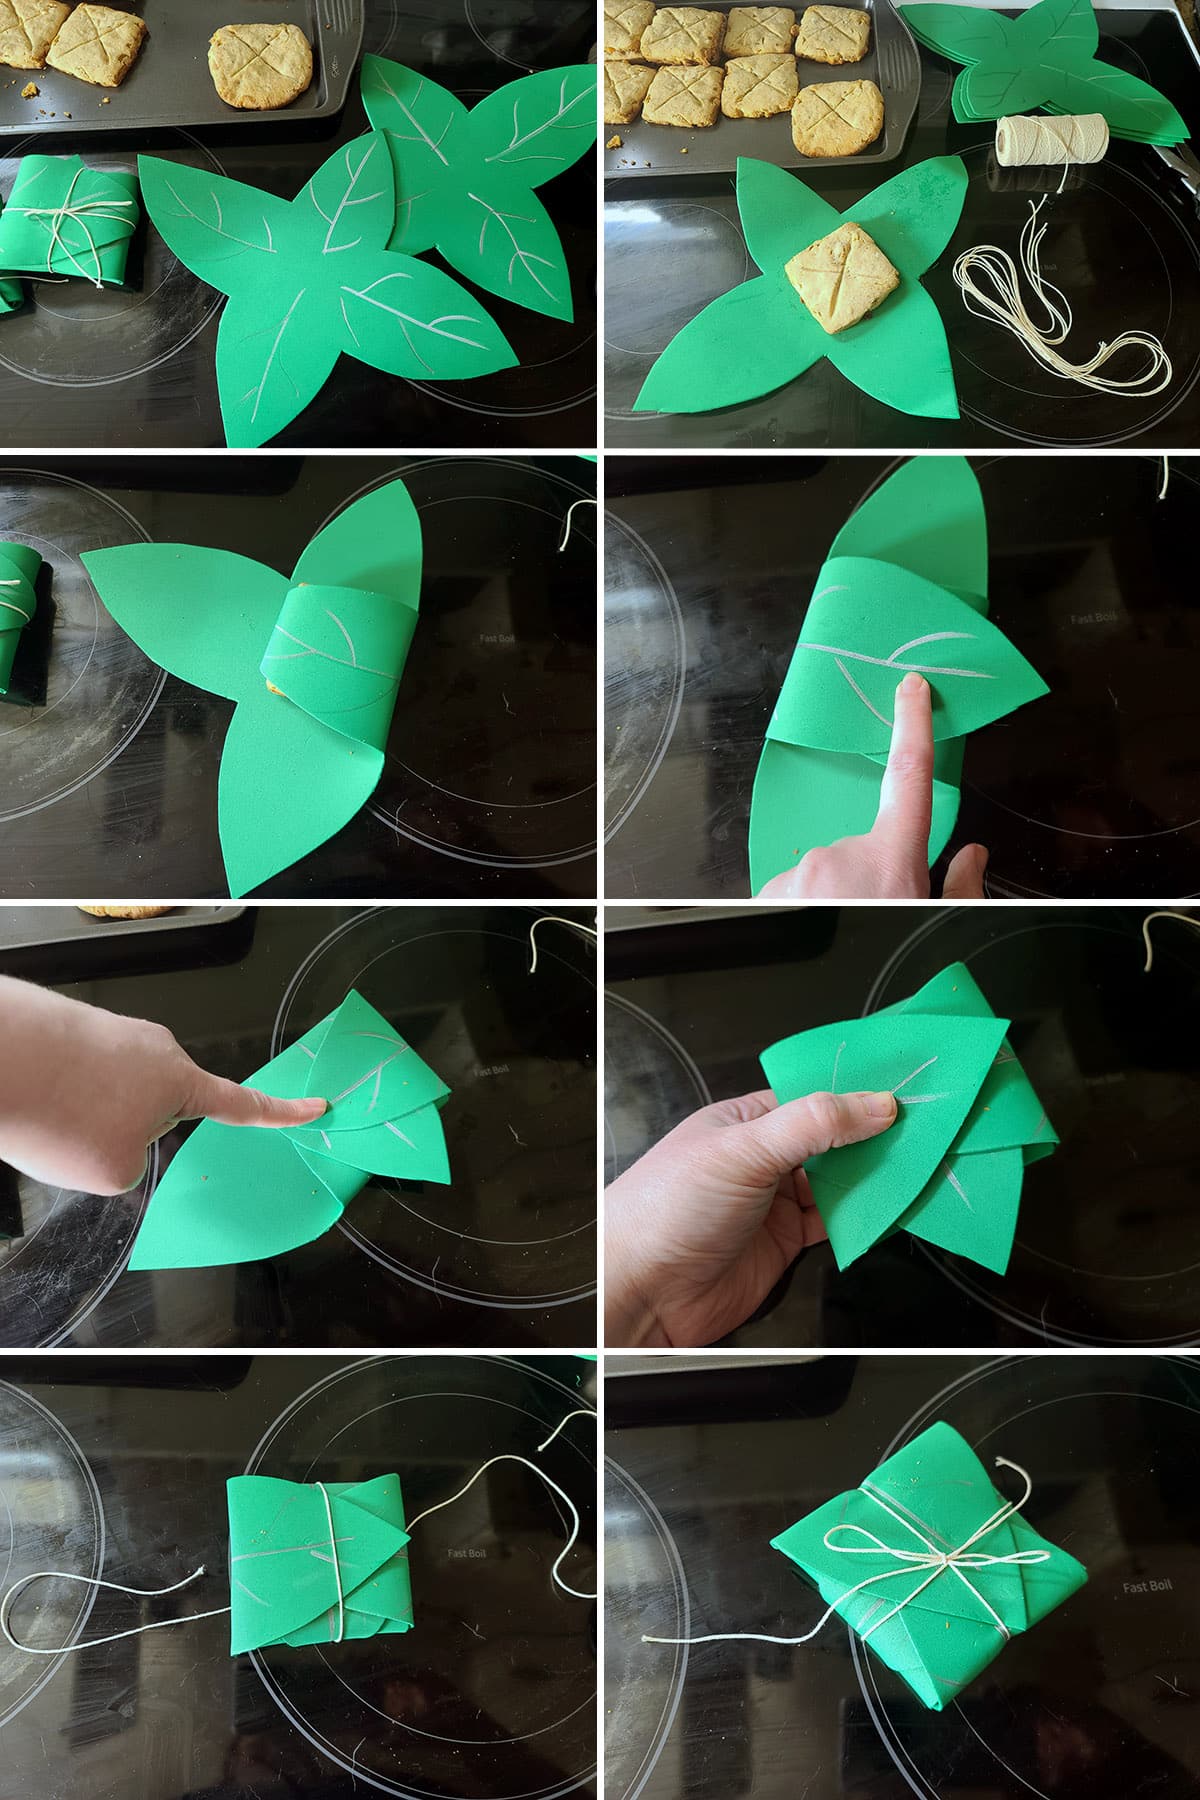 An 8 part image showing a square of Elvish waybread being wrapped in a craft foam Mallorn leaf.